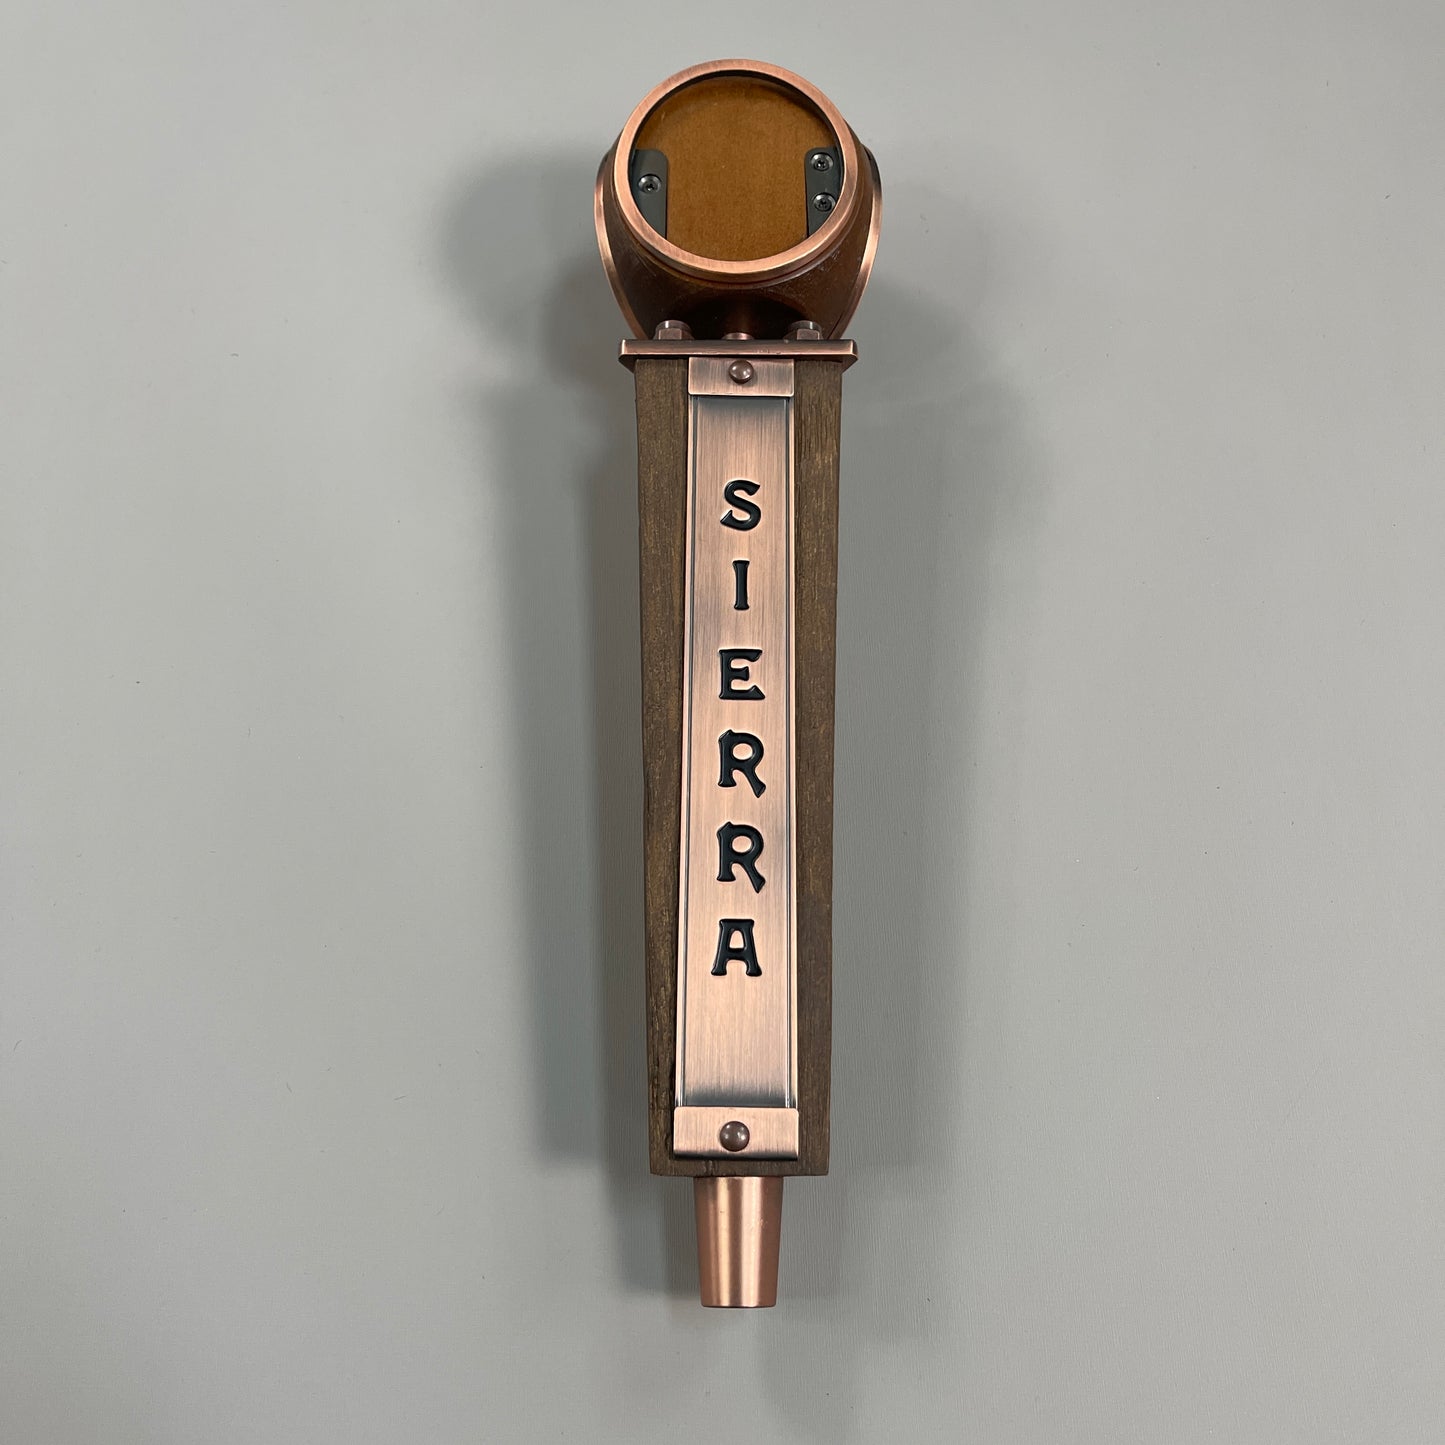 SIERRA NEVADA Three-Sided Iconic Tall Beer Tap Handle Copper & Wood 12" (New)